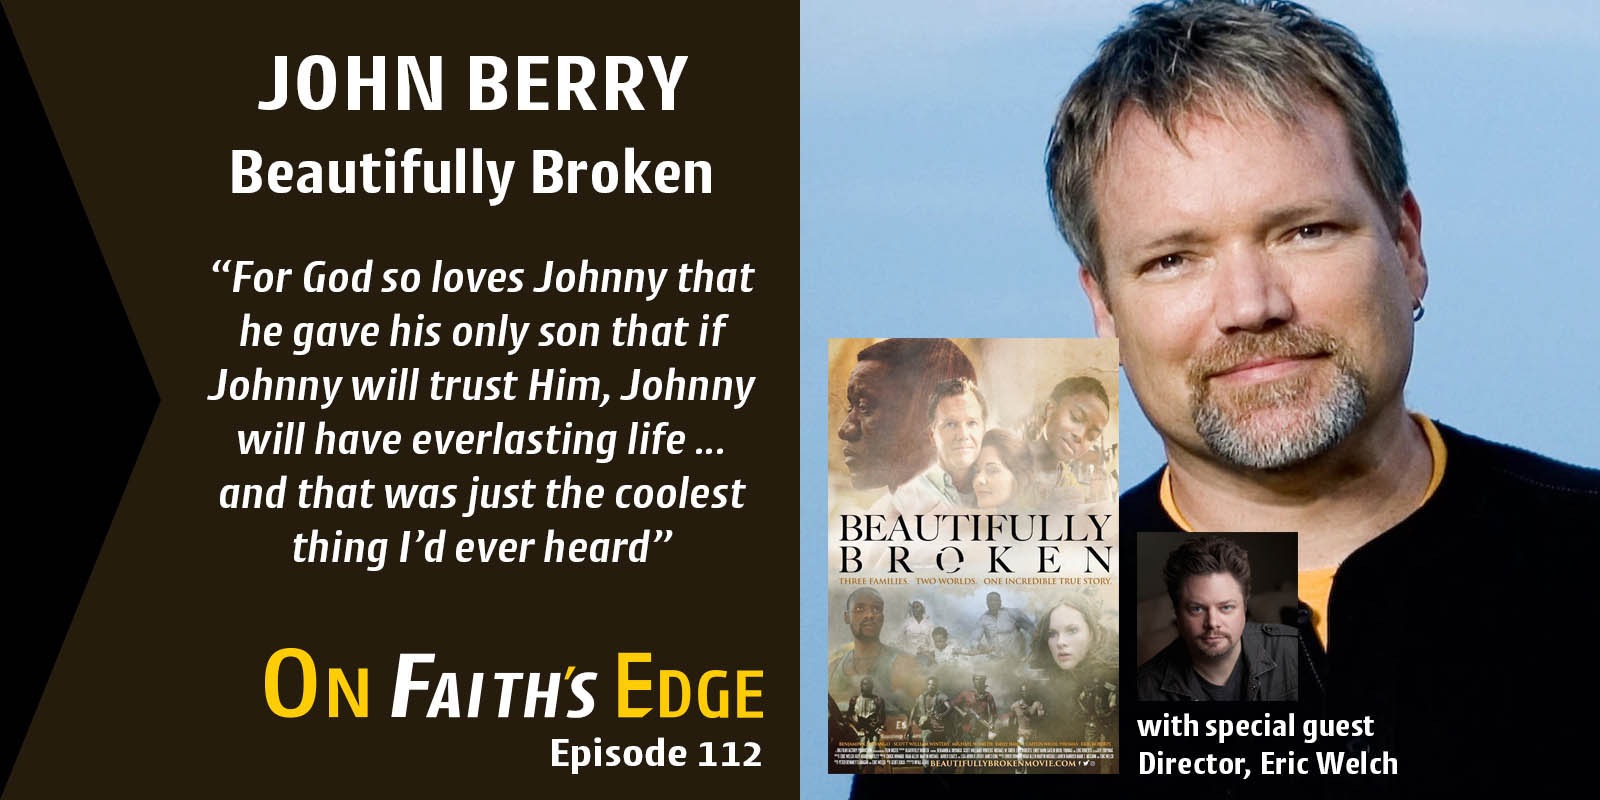 Beautifully Broken, The True Story and The Music | Grammy Winner John Berry with special guest Director, Eric Welch